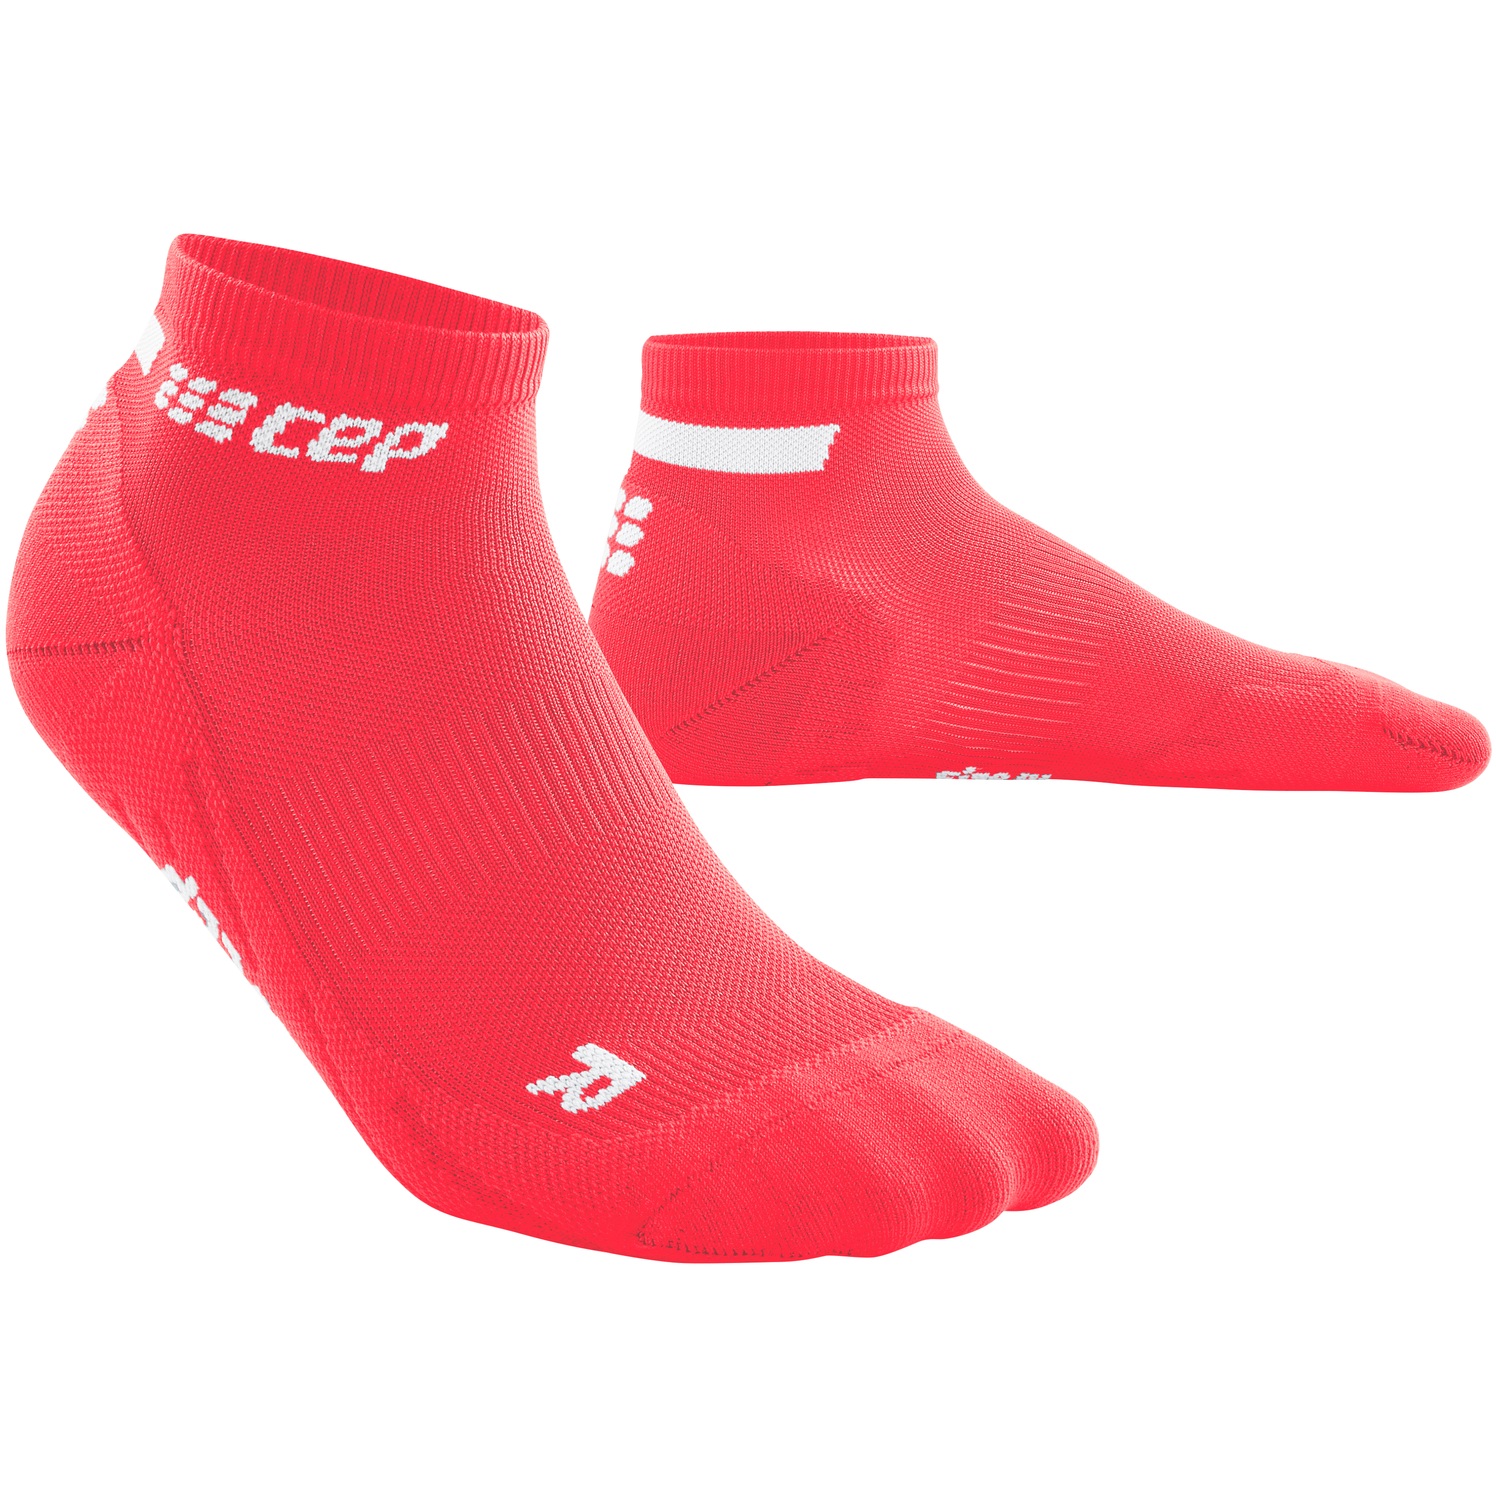 Picture of CEP The Run Low Cut Compression Socks V4 - pink